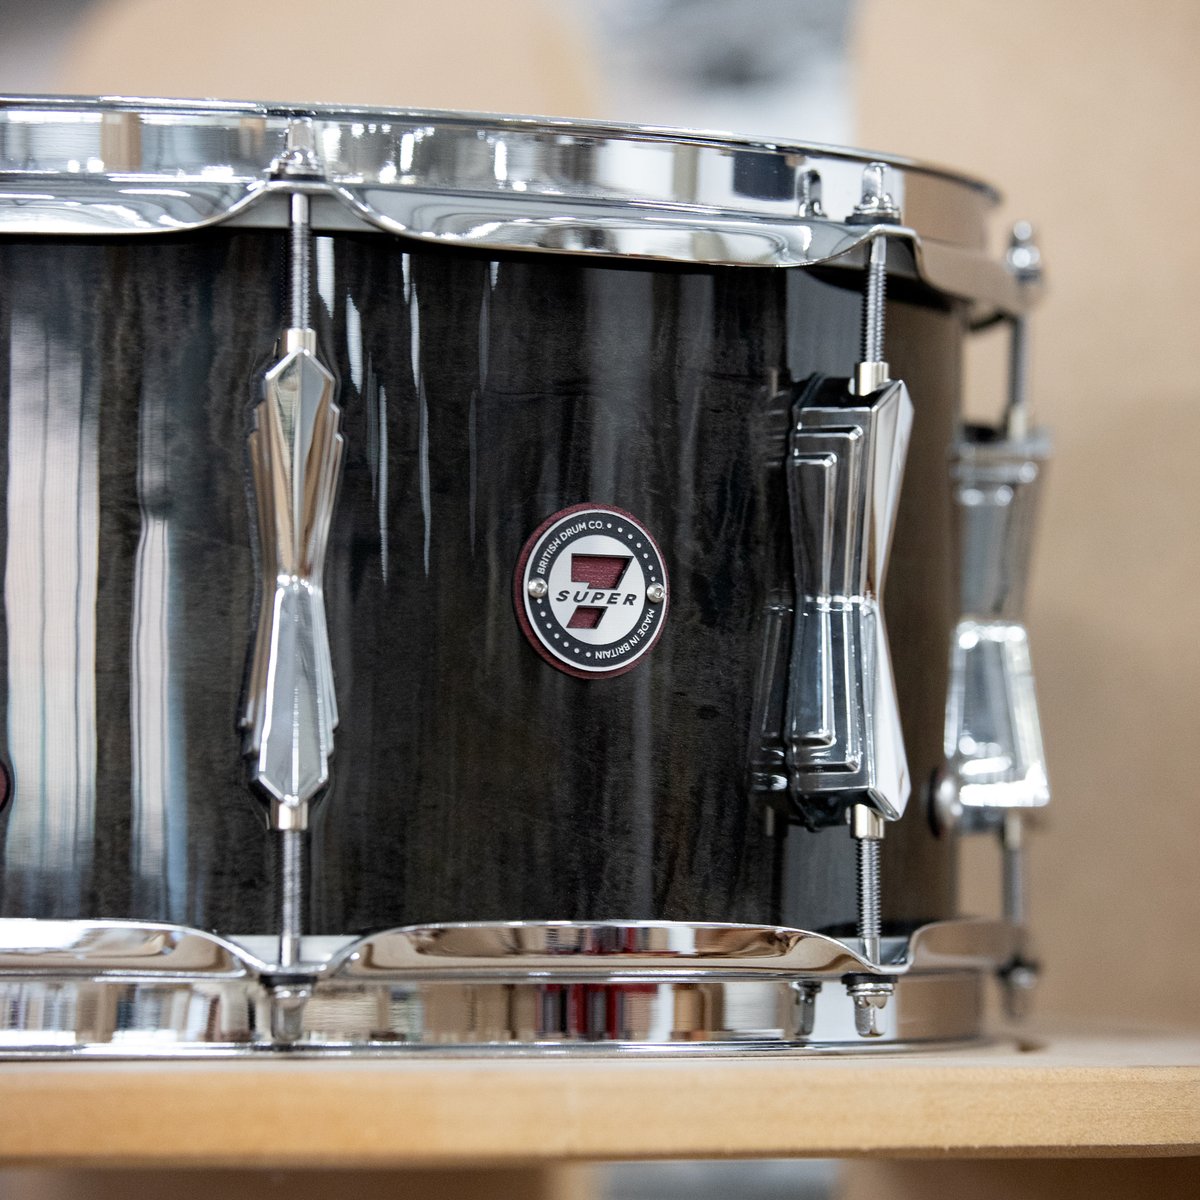 Get ready to turn up the volume with our Super7 snare drum! 🥁 Equipped with 4 vents for max power and volume, this 13'x7' drum is not to be dismissed. Super7 will deliver the punch and projection you need to stand out from the crowd. #Super7 #purpleheart #madeinbritain